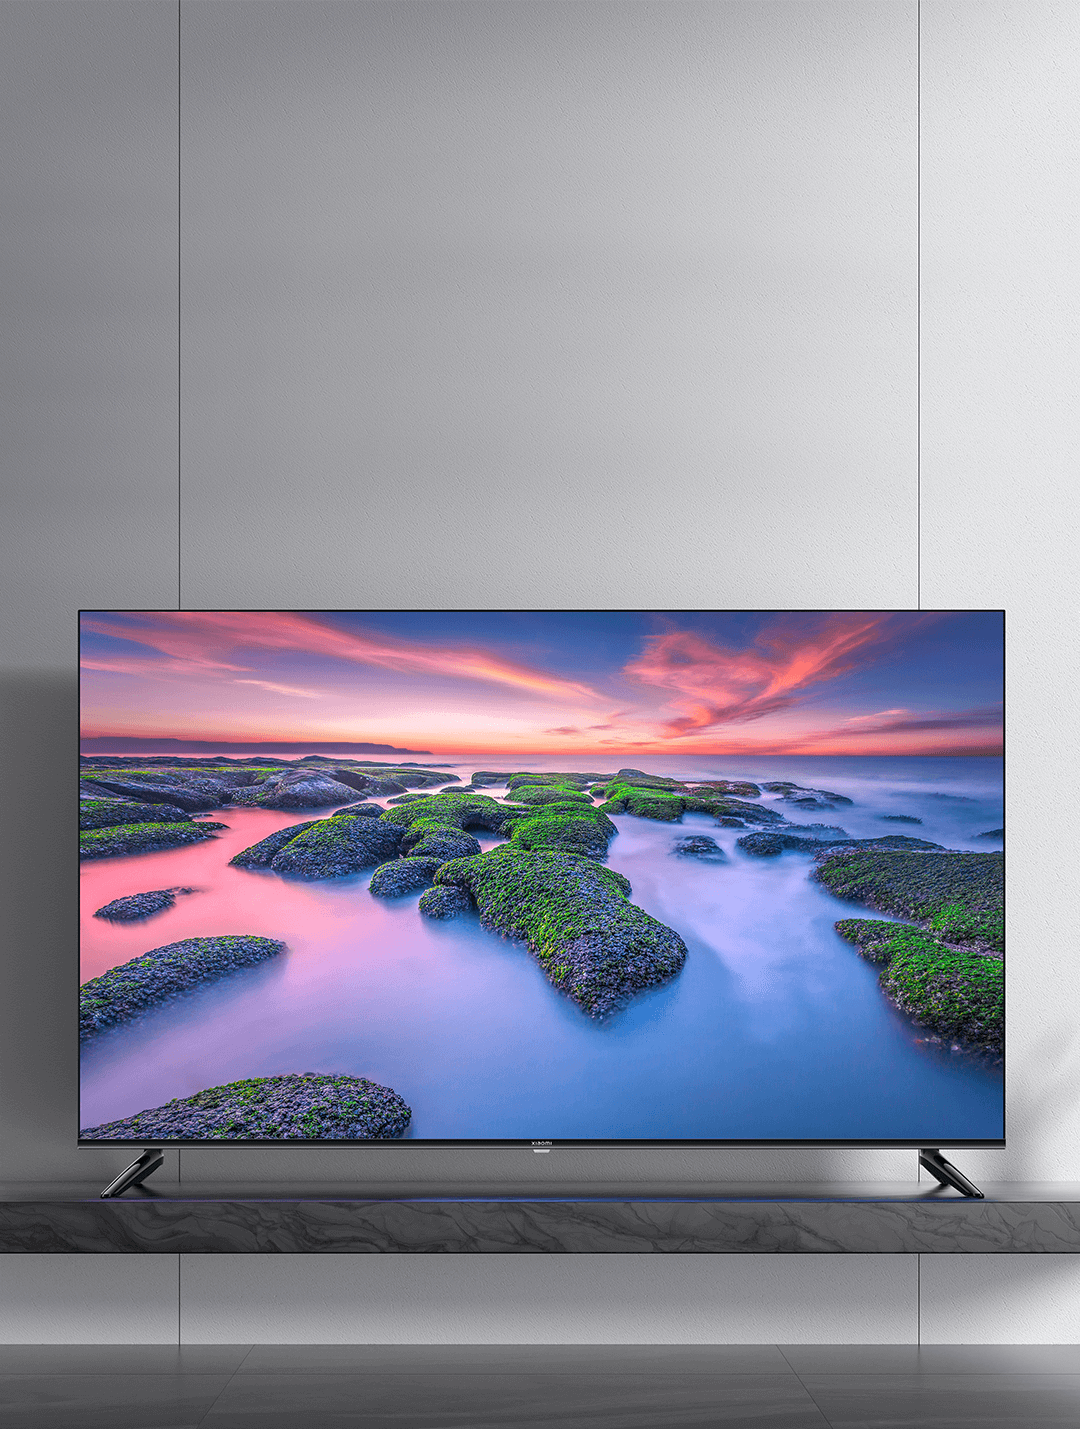 Xiaomi TV A2 (32, HD, HDR): Price, specs and best deals